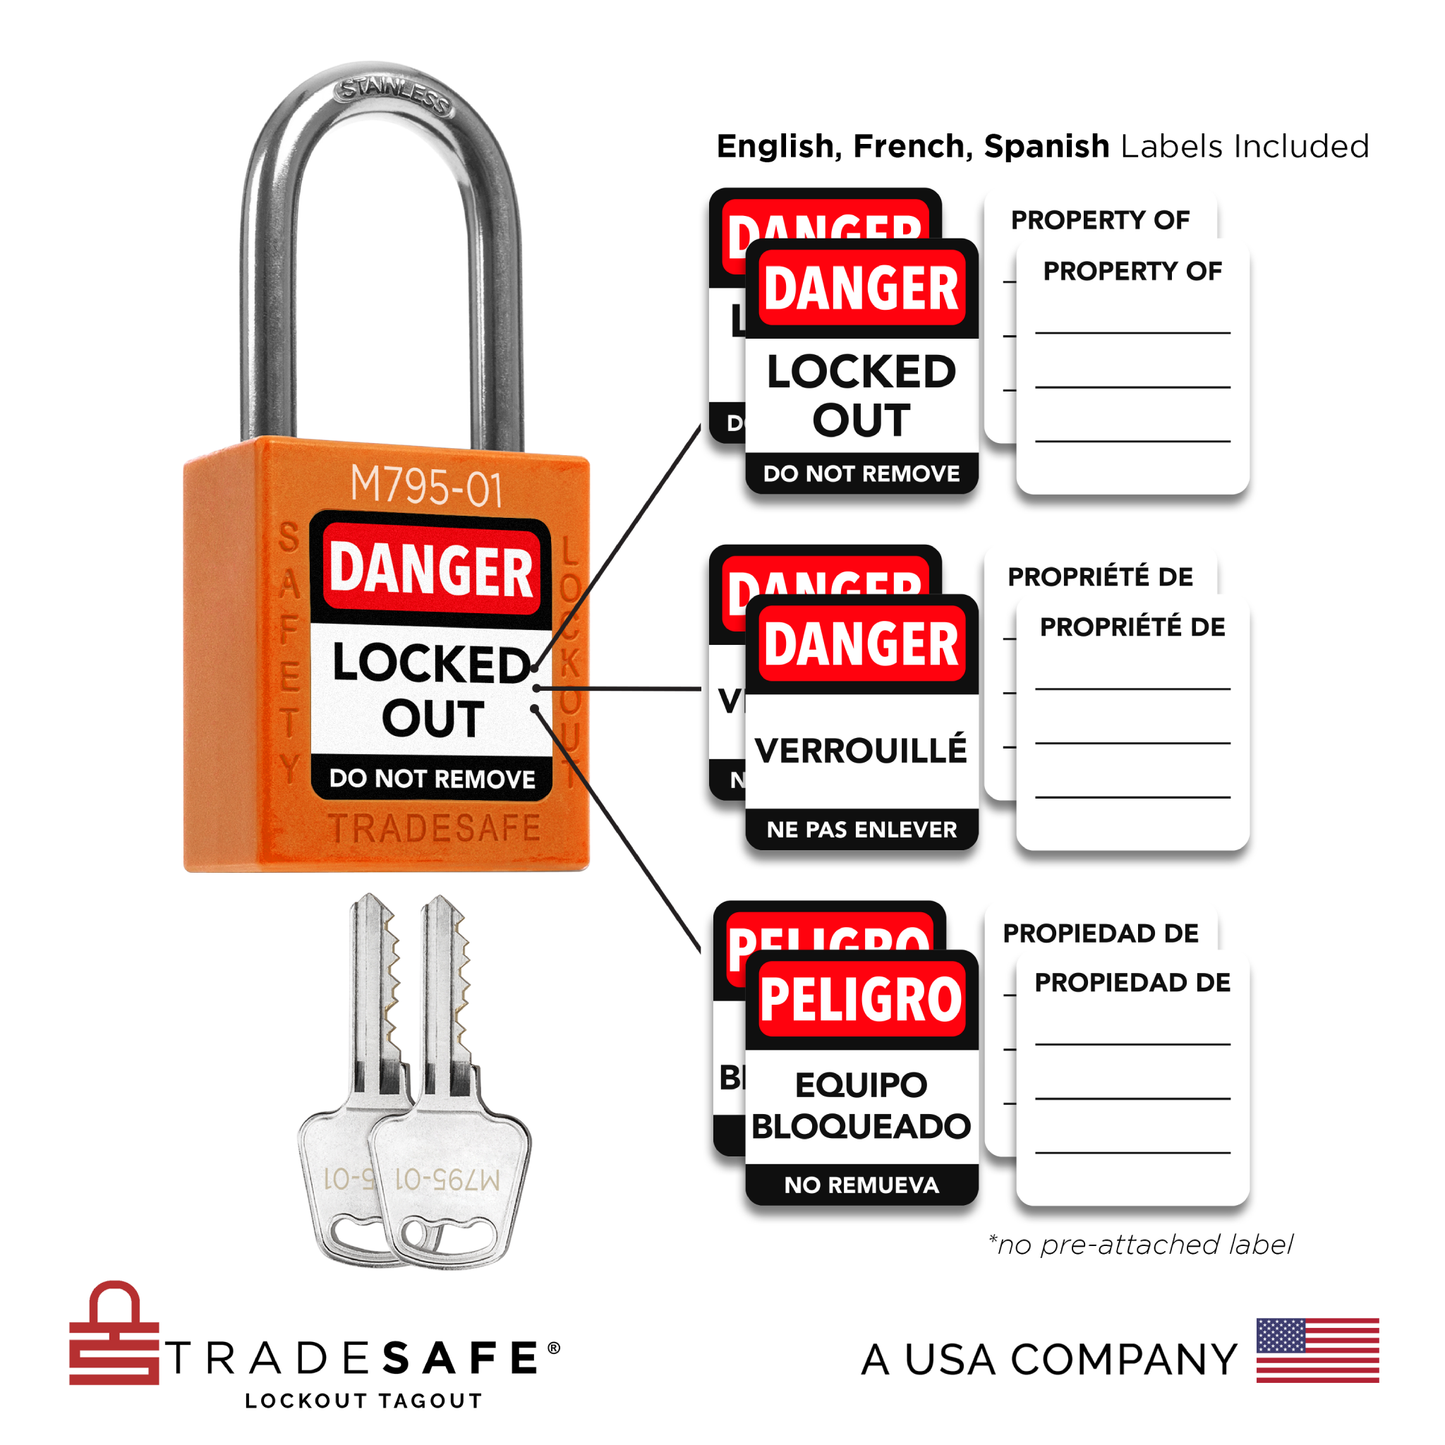 visual representation of orange keyed different lock with master key including labels in three languages